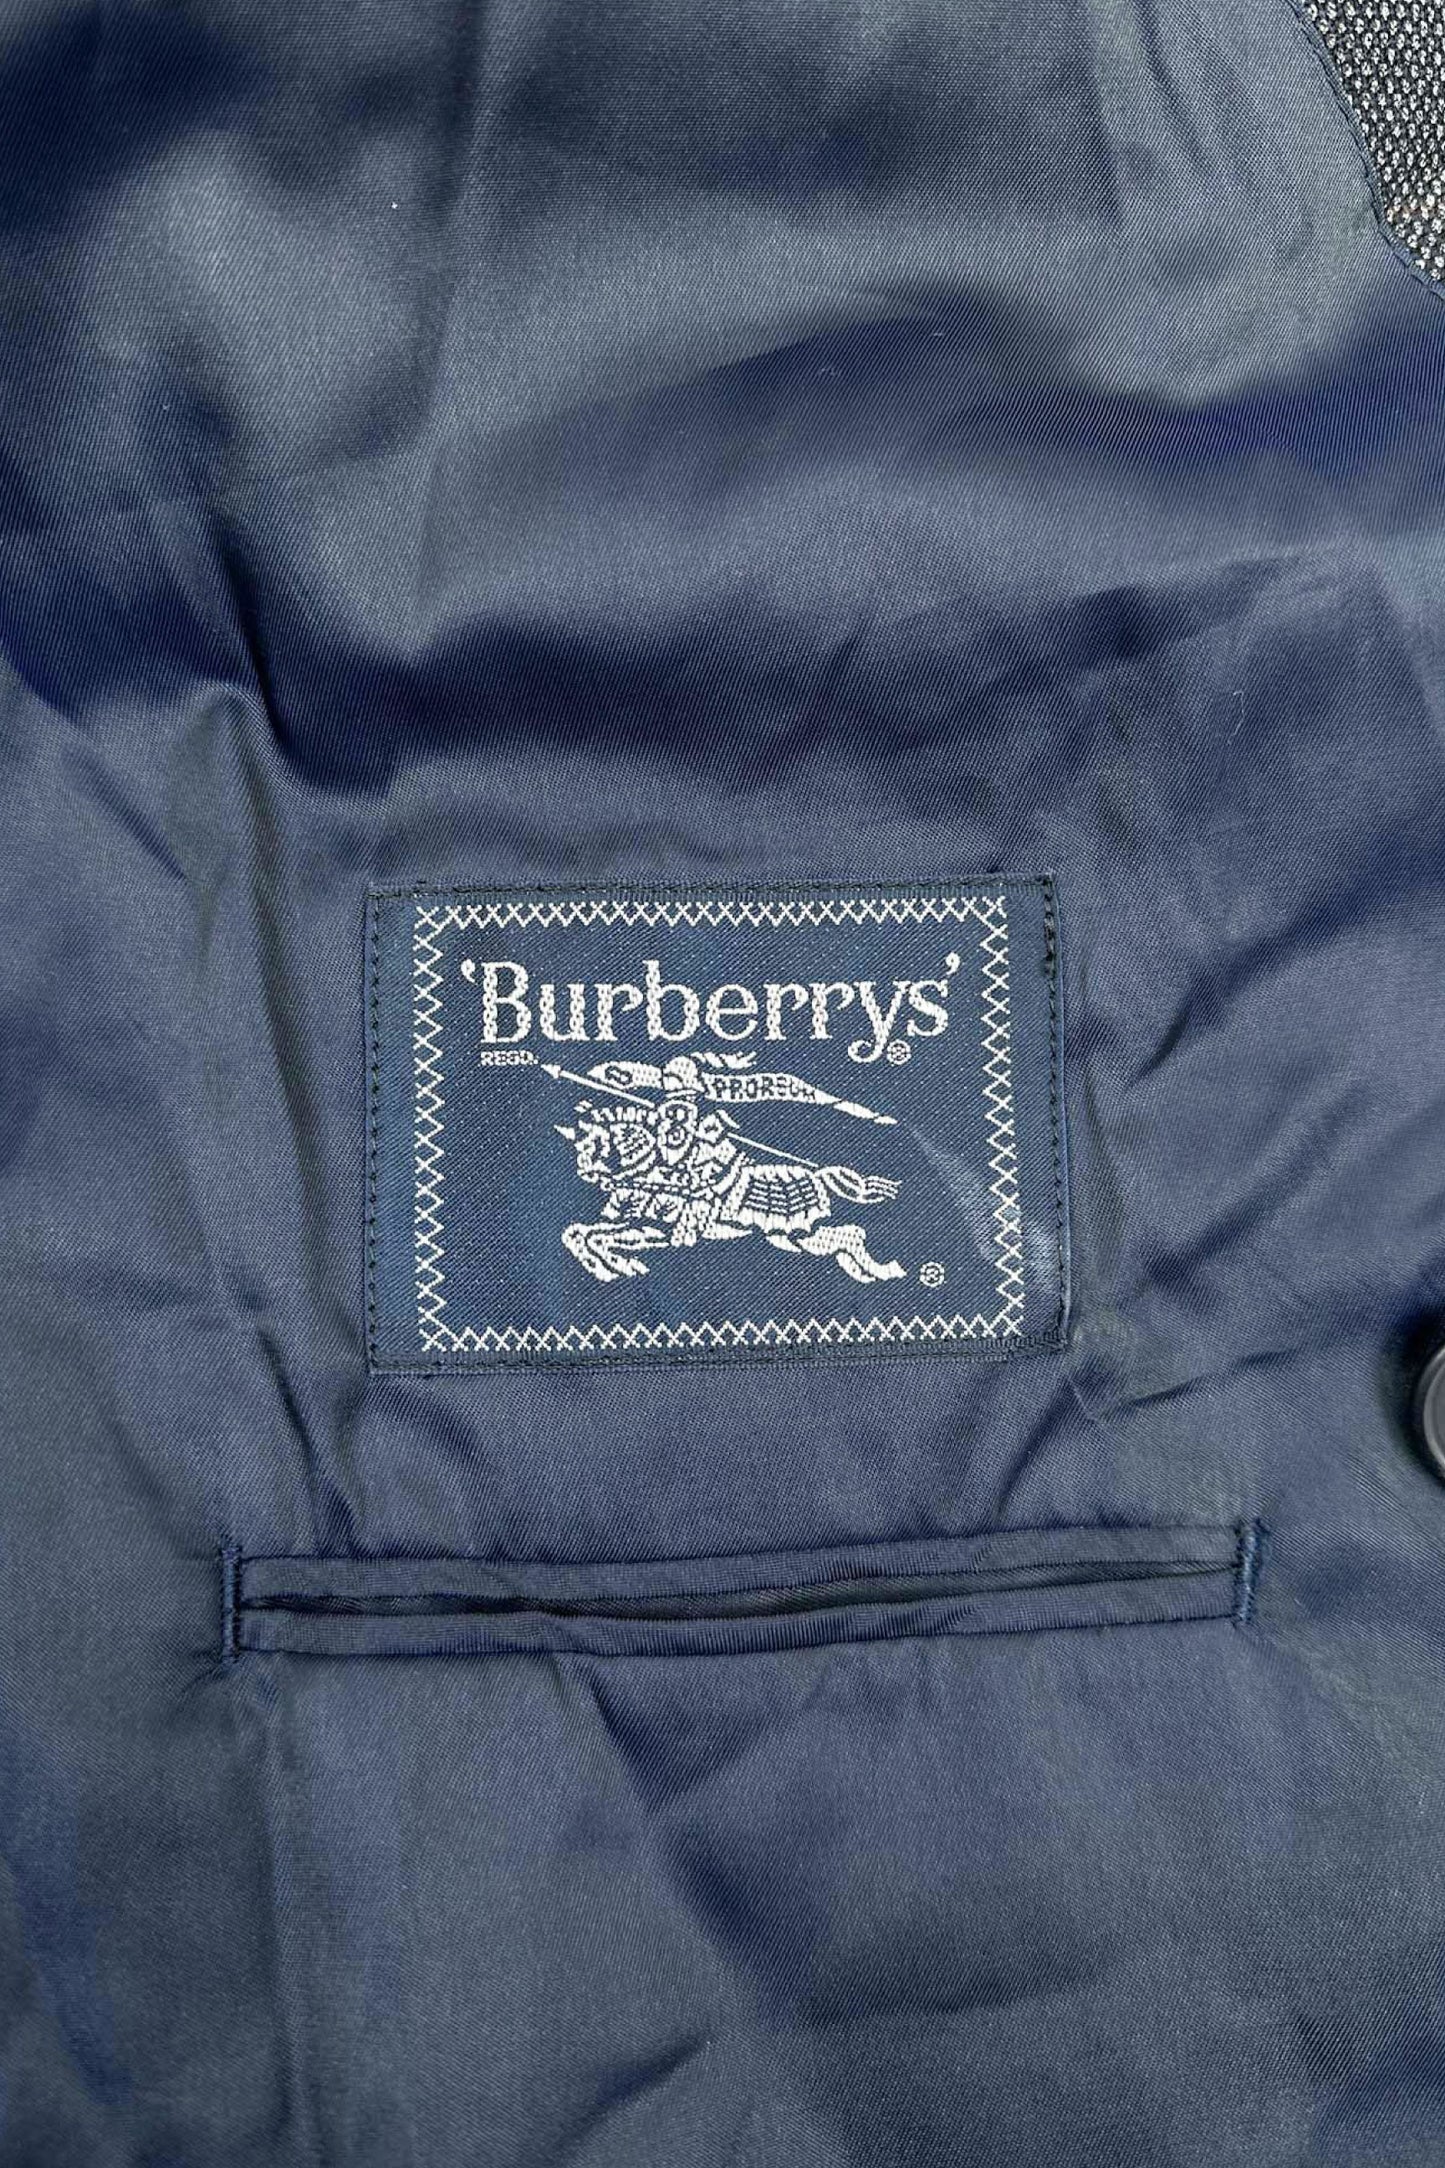 90‘s Burberrys' gray check jaclet